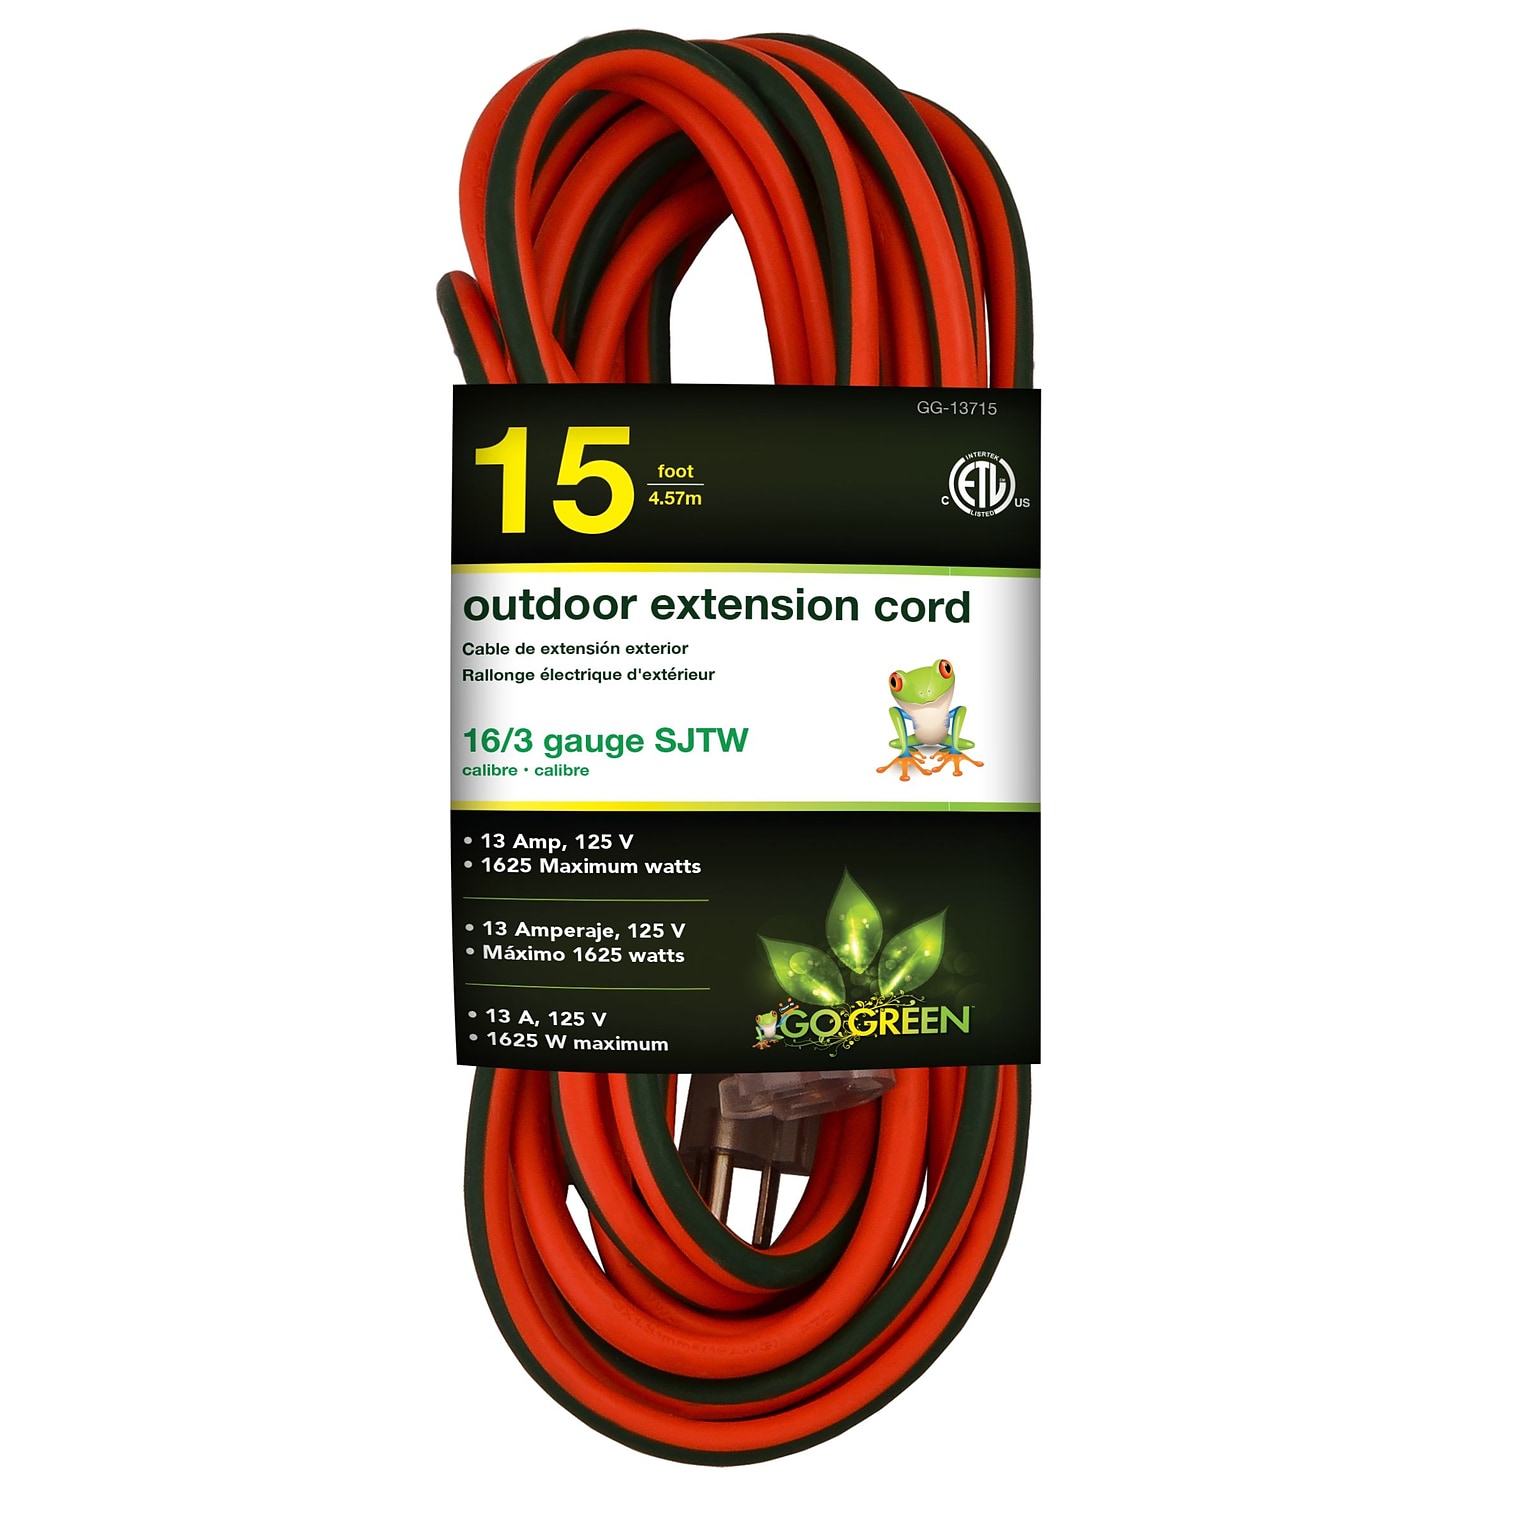 GoGreen Power 16/3 15 Heavy Duty Extension Cord - Lighted End, Orange - GG-13715